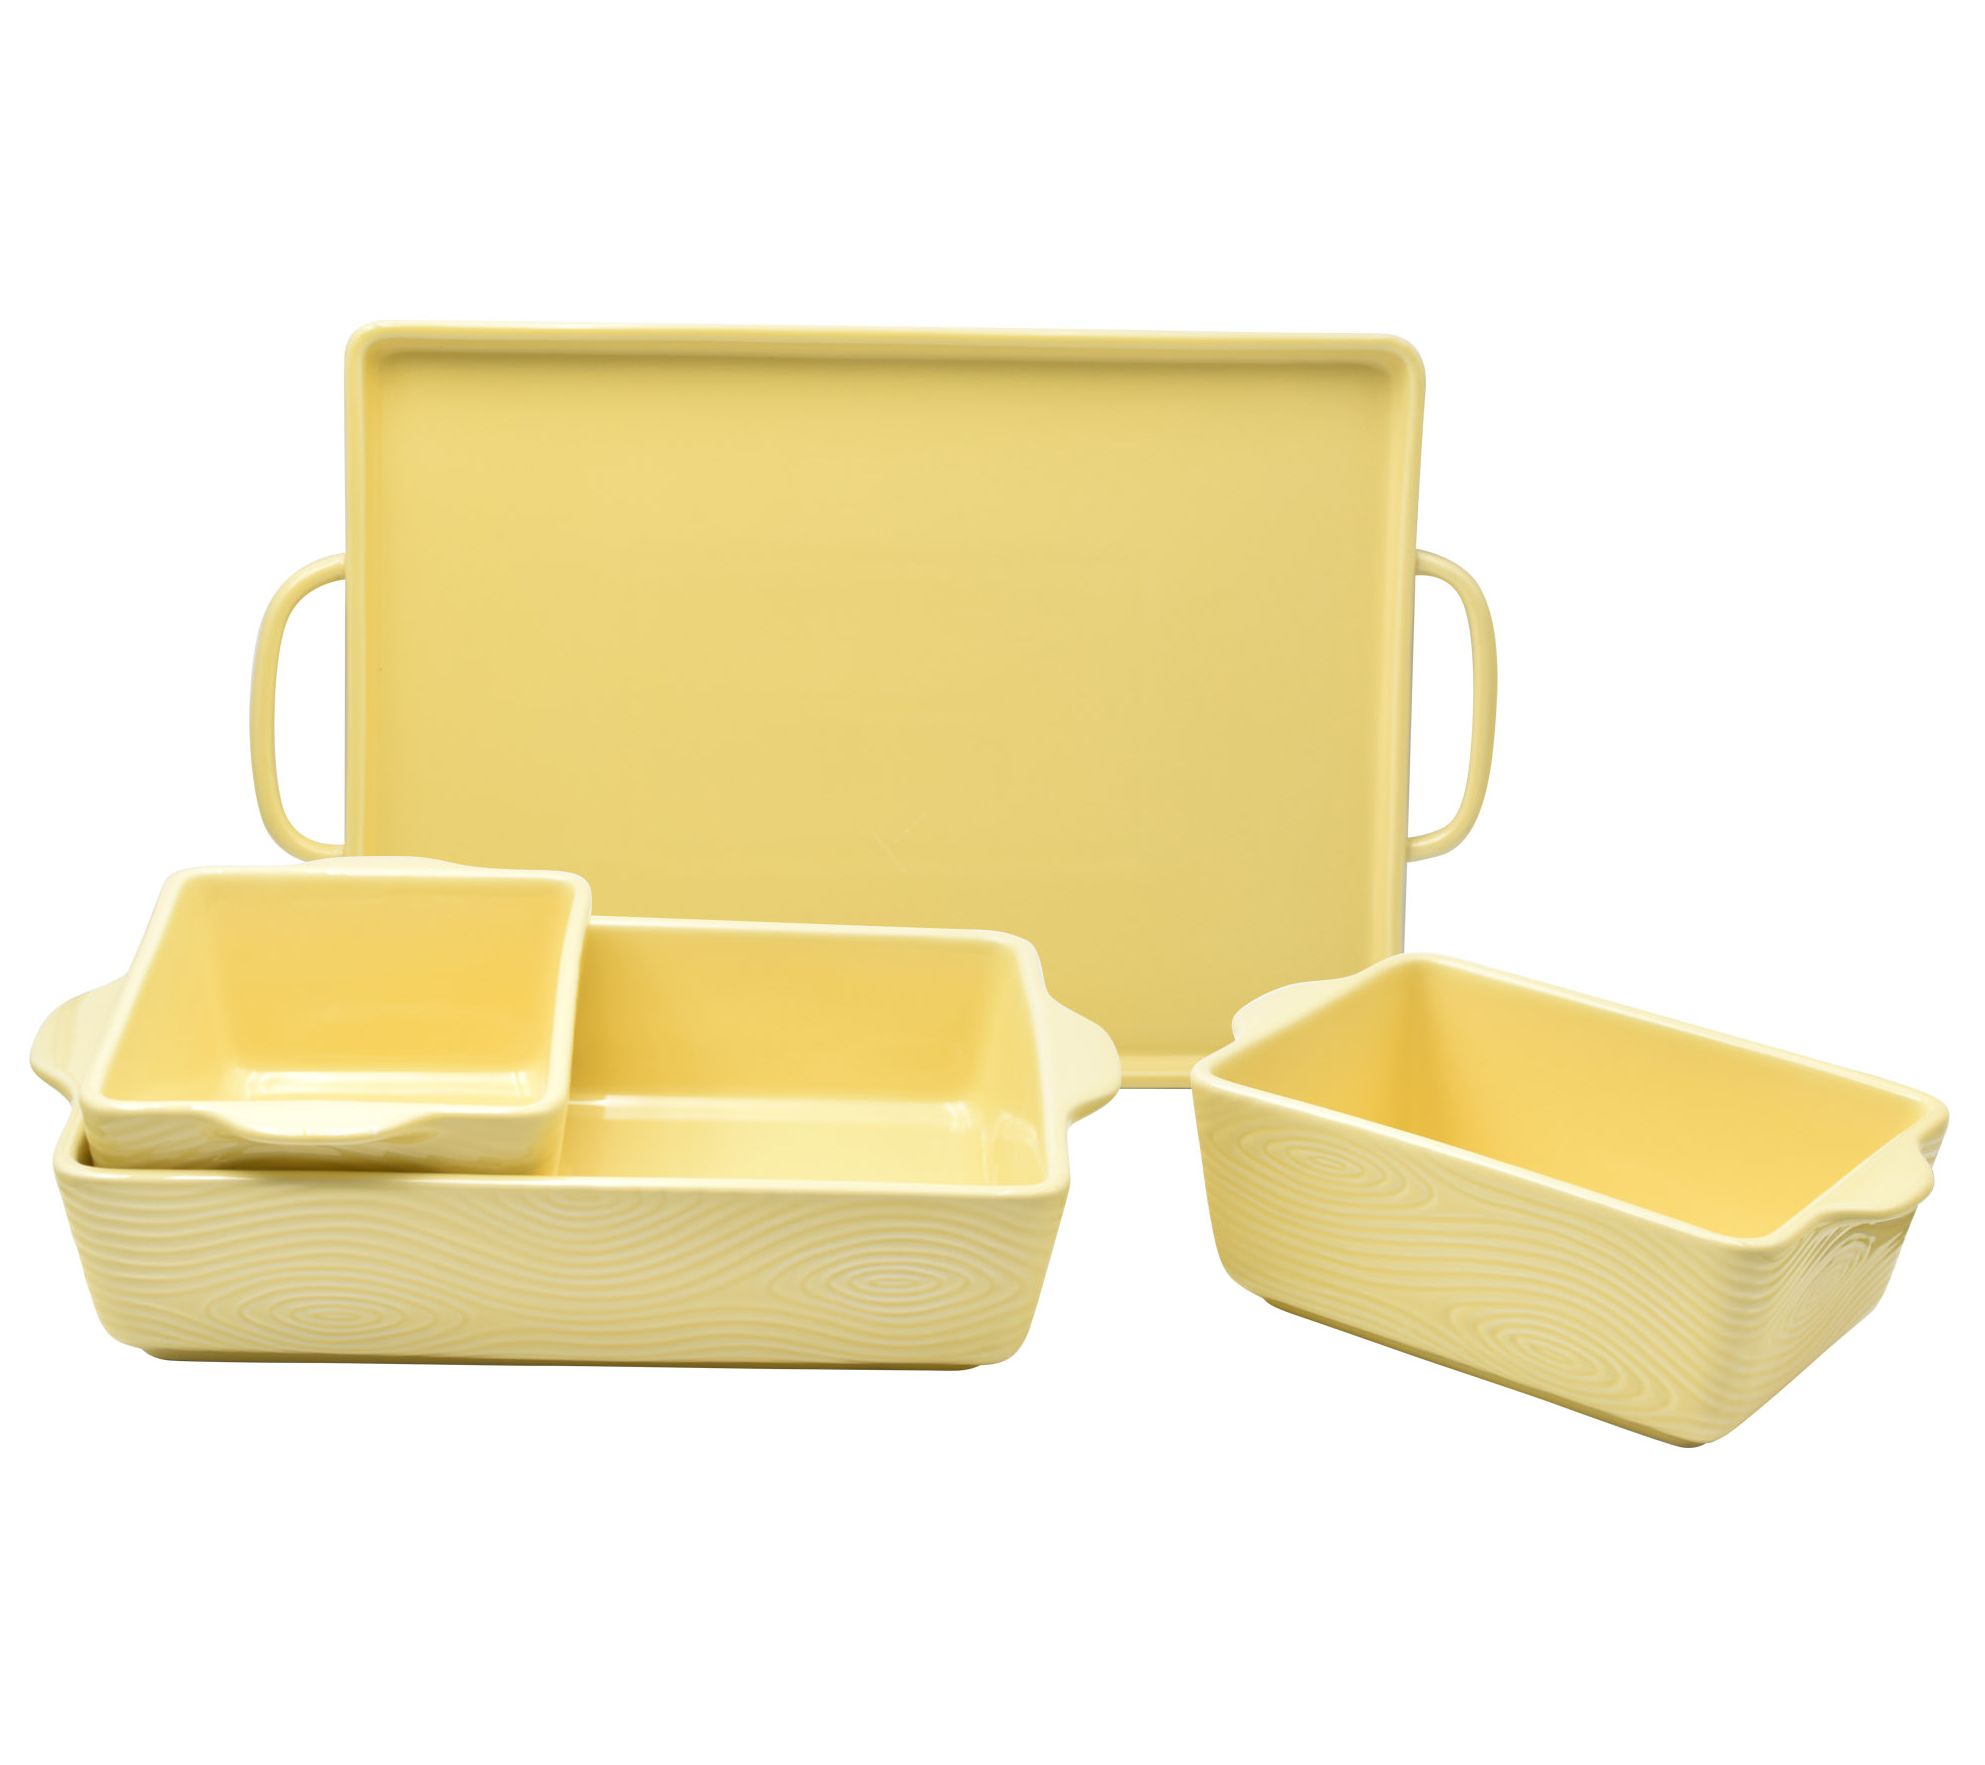 Rubbermaid DuraLite Glass Bakeware, 12-Piece Set, Baking Dishes, Casserole  Dishes, and Ramekins & Reviews